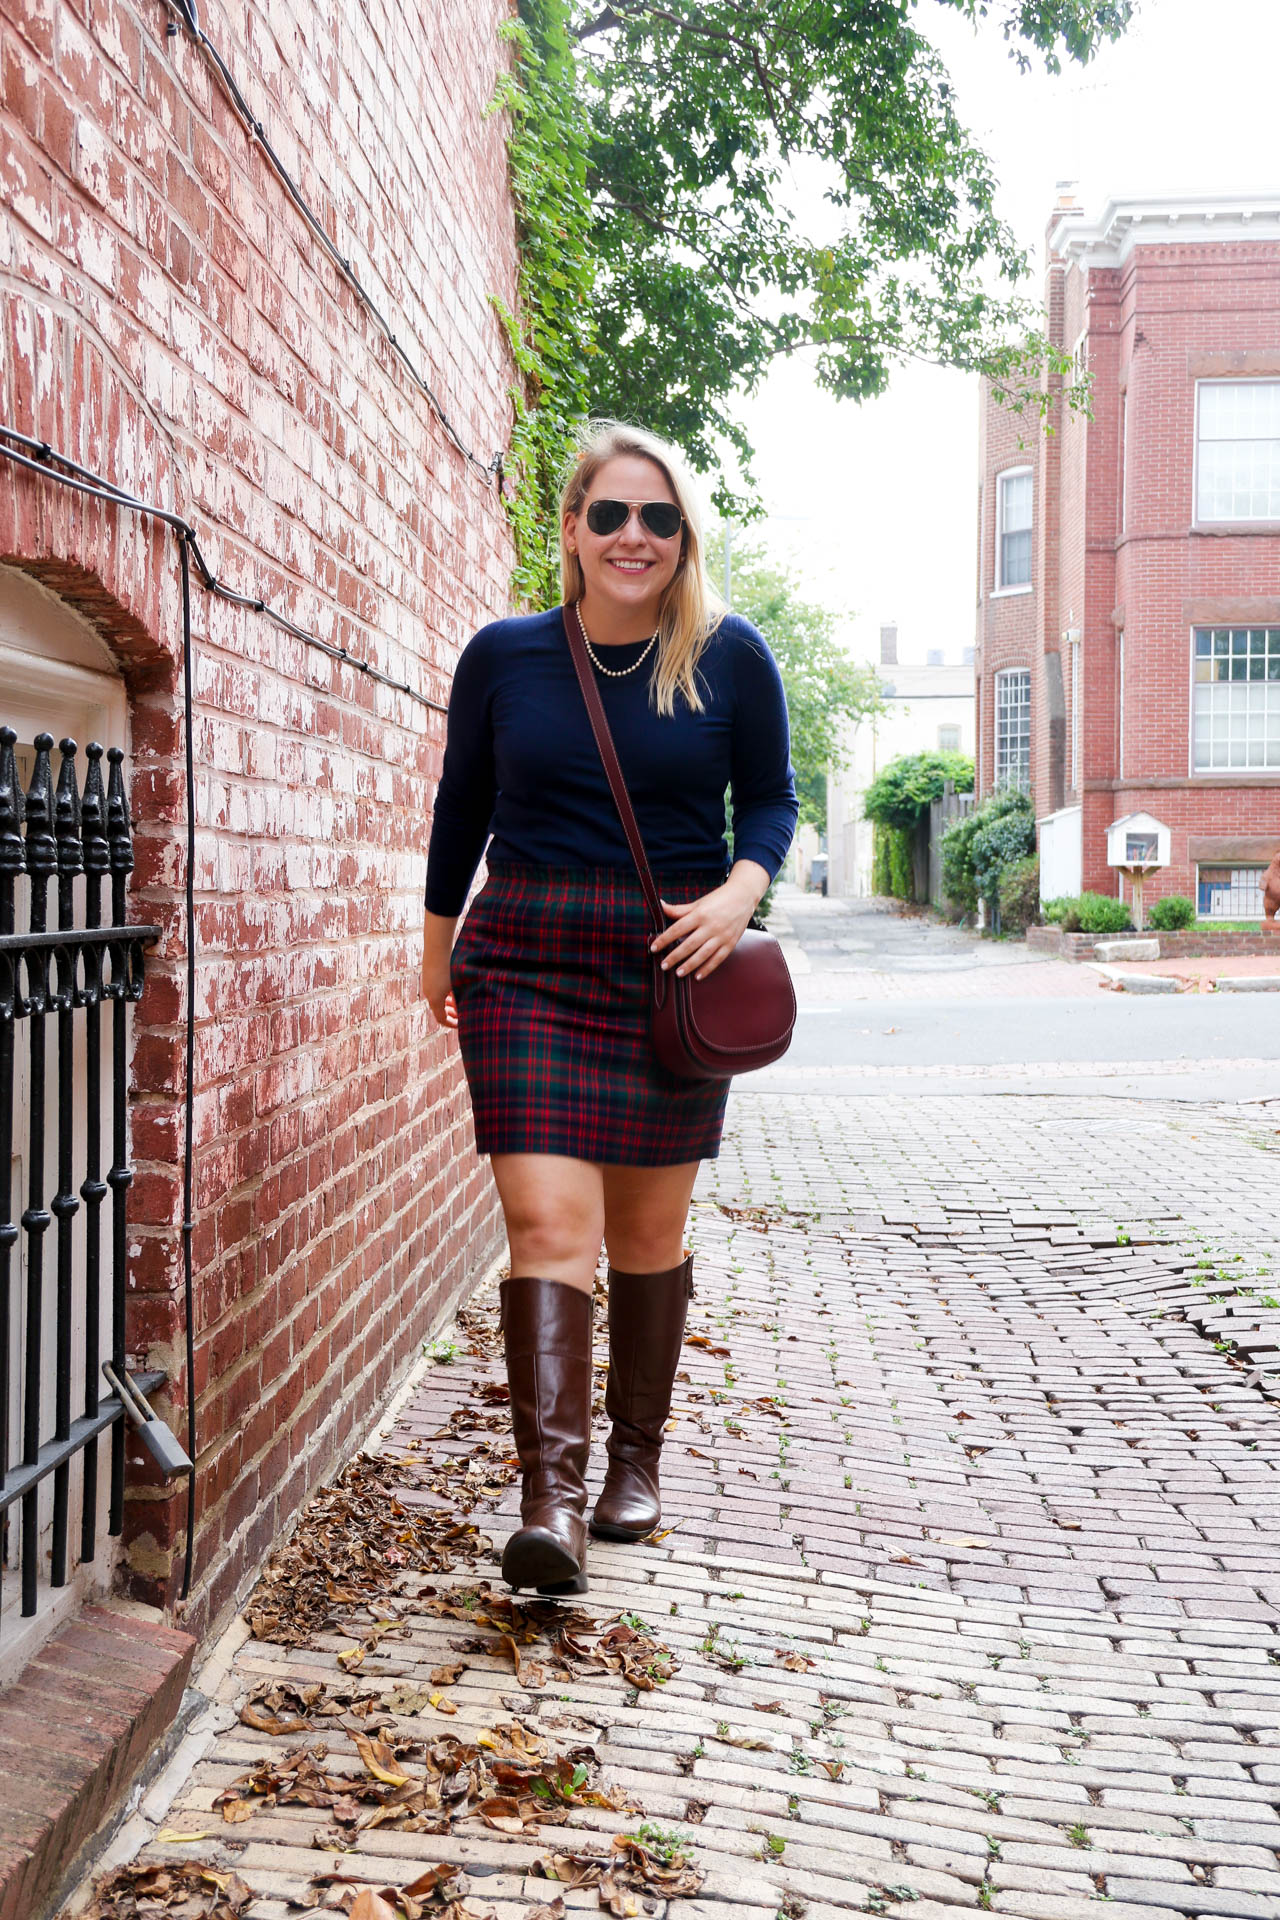 J.Crew Tippi Sweater | @dcgirlinpearls